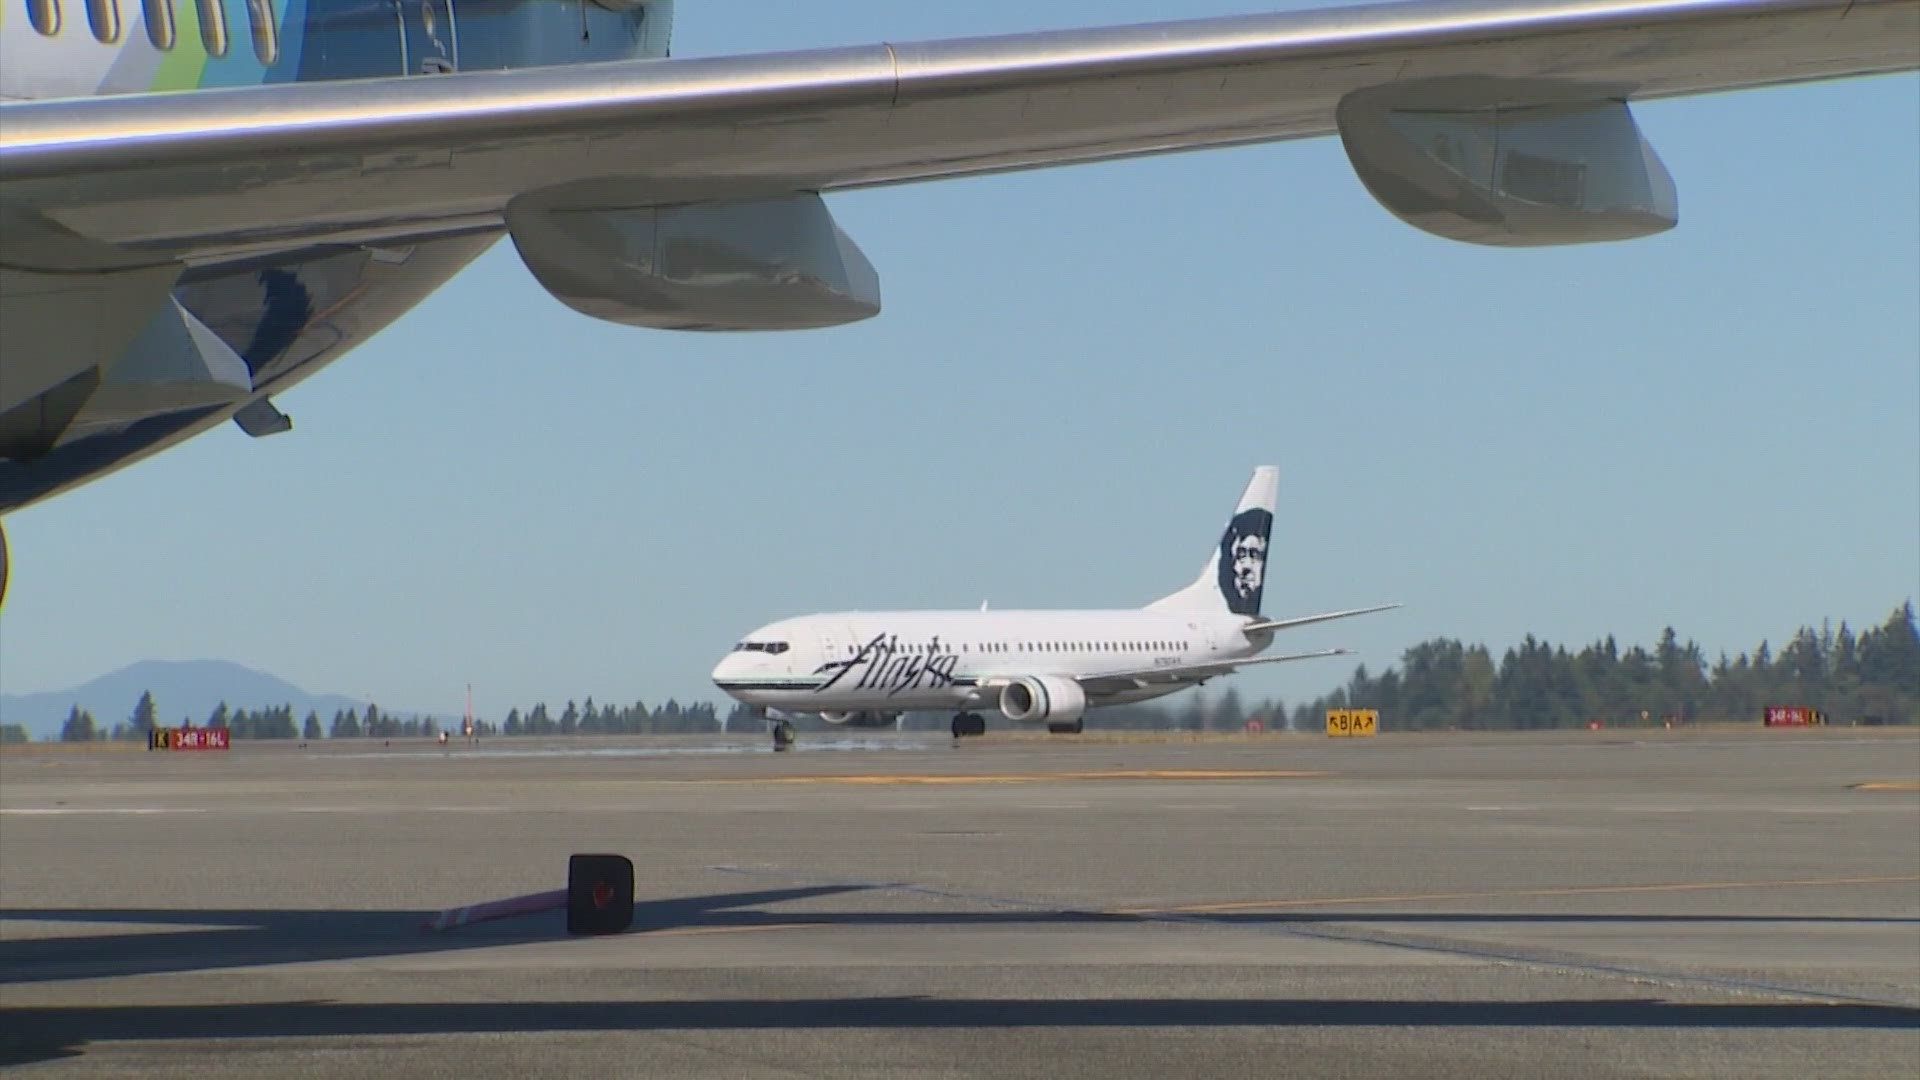 The planes have been grounded since shortly after the midflight blowout of a panel in the side of an Alaska plane over Oregon on Jan. 5.